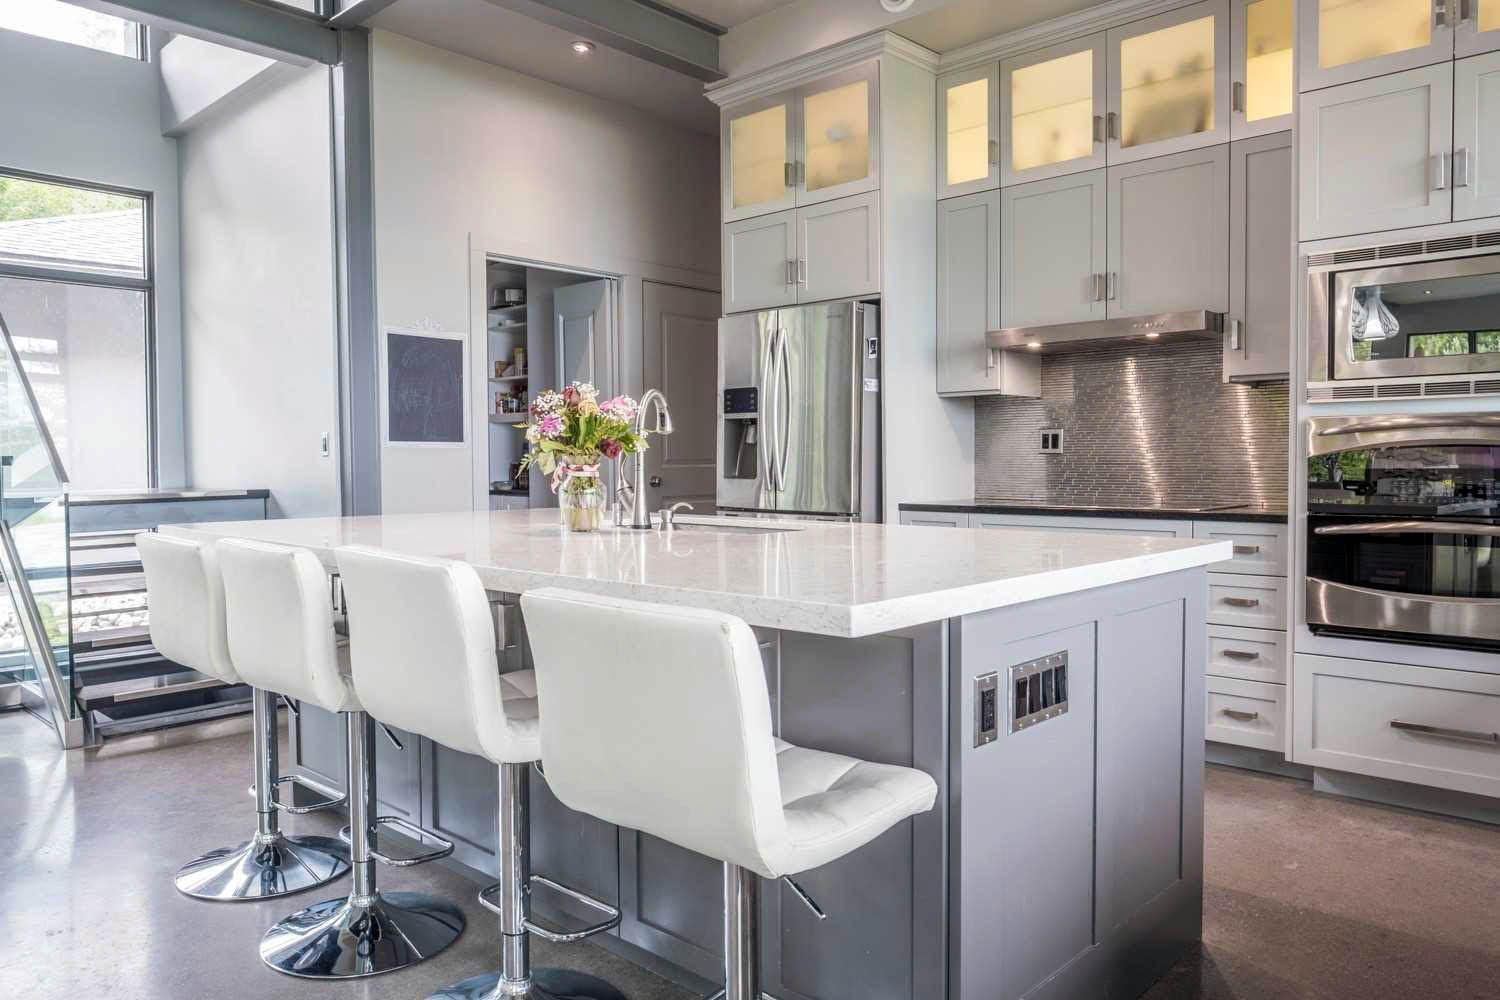 Modern kitchen design featuring cream colored cabinets. Marble countertops.